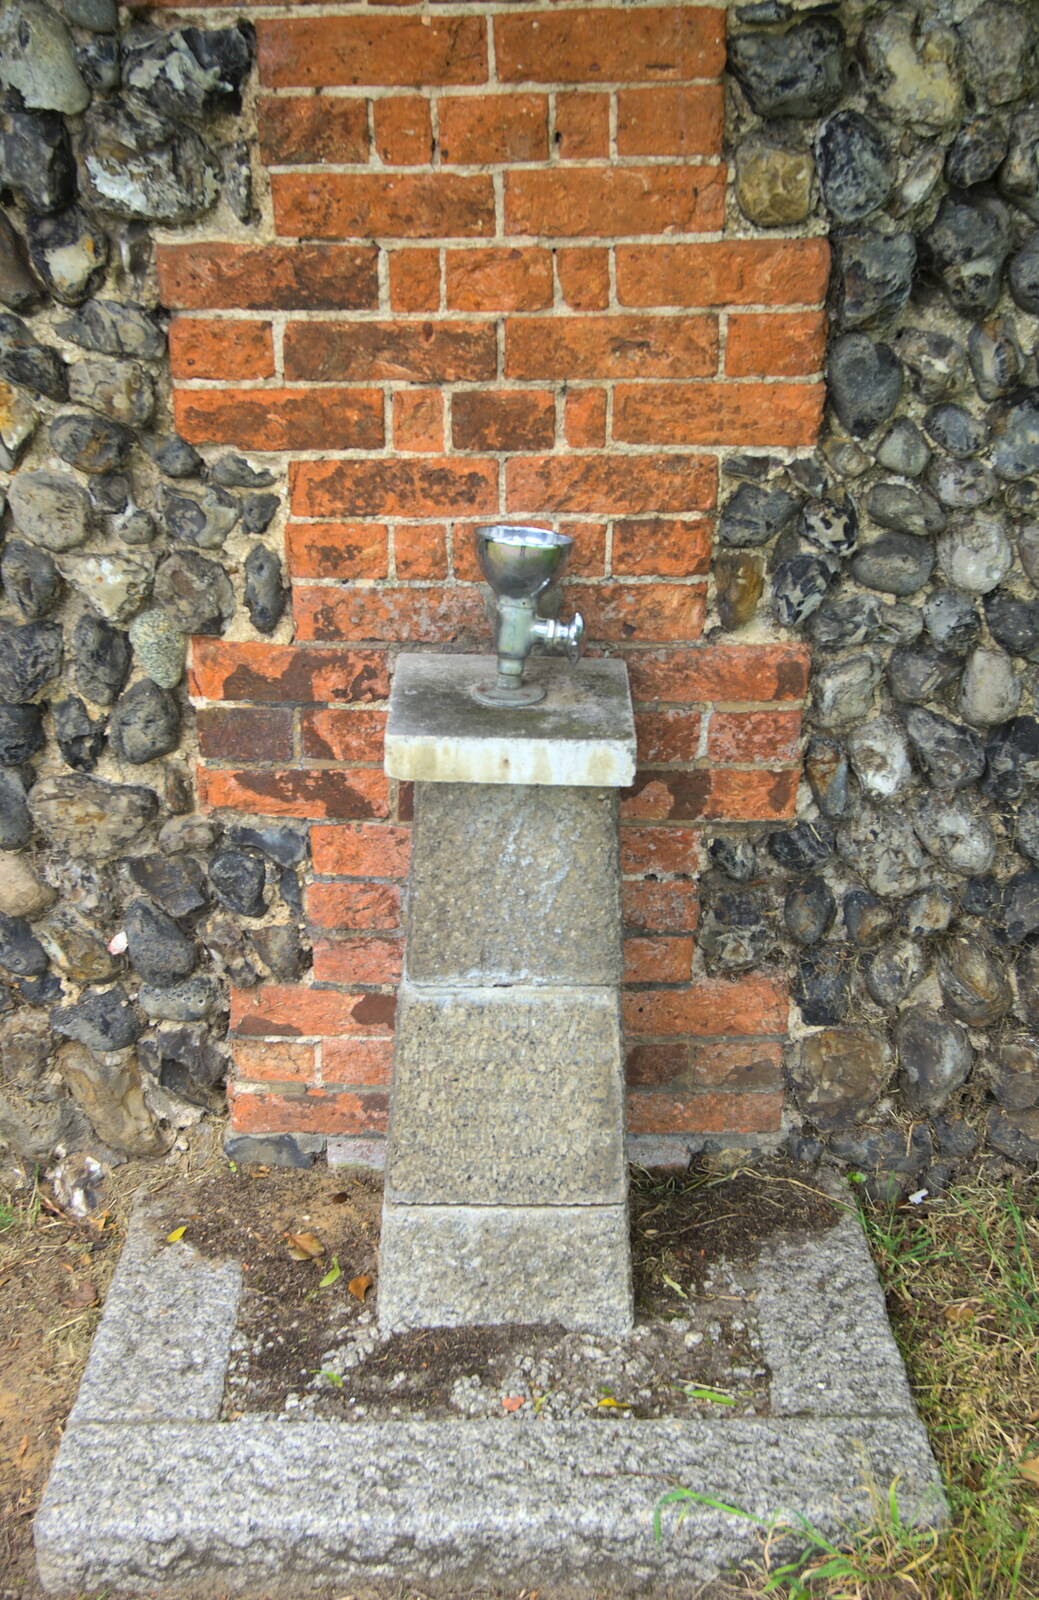 Fred's Sports Day and Other Stories, Palgrave, Suffolk - 2nd June 2012: A drinking fountain in Diss Park